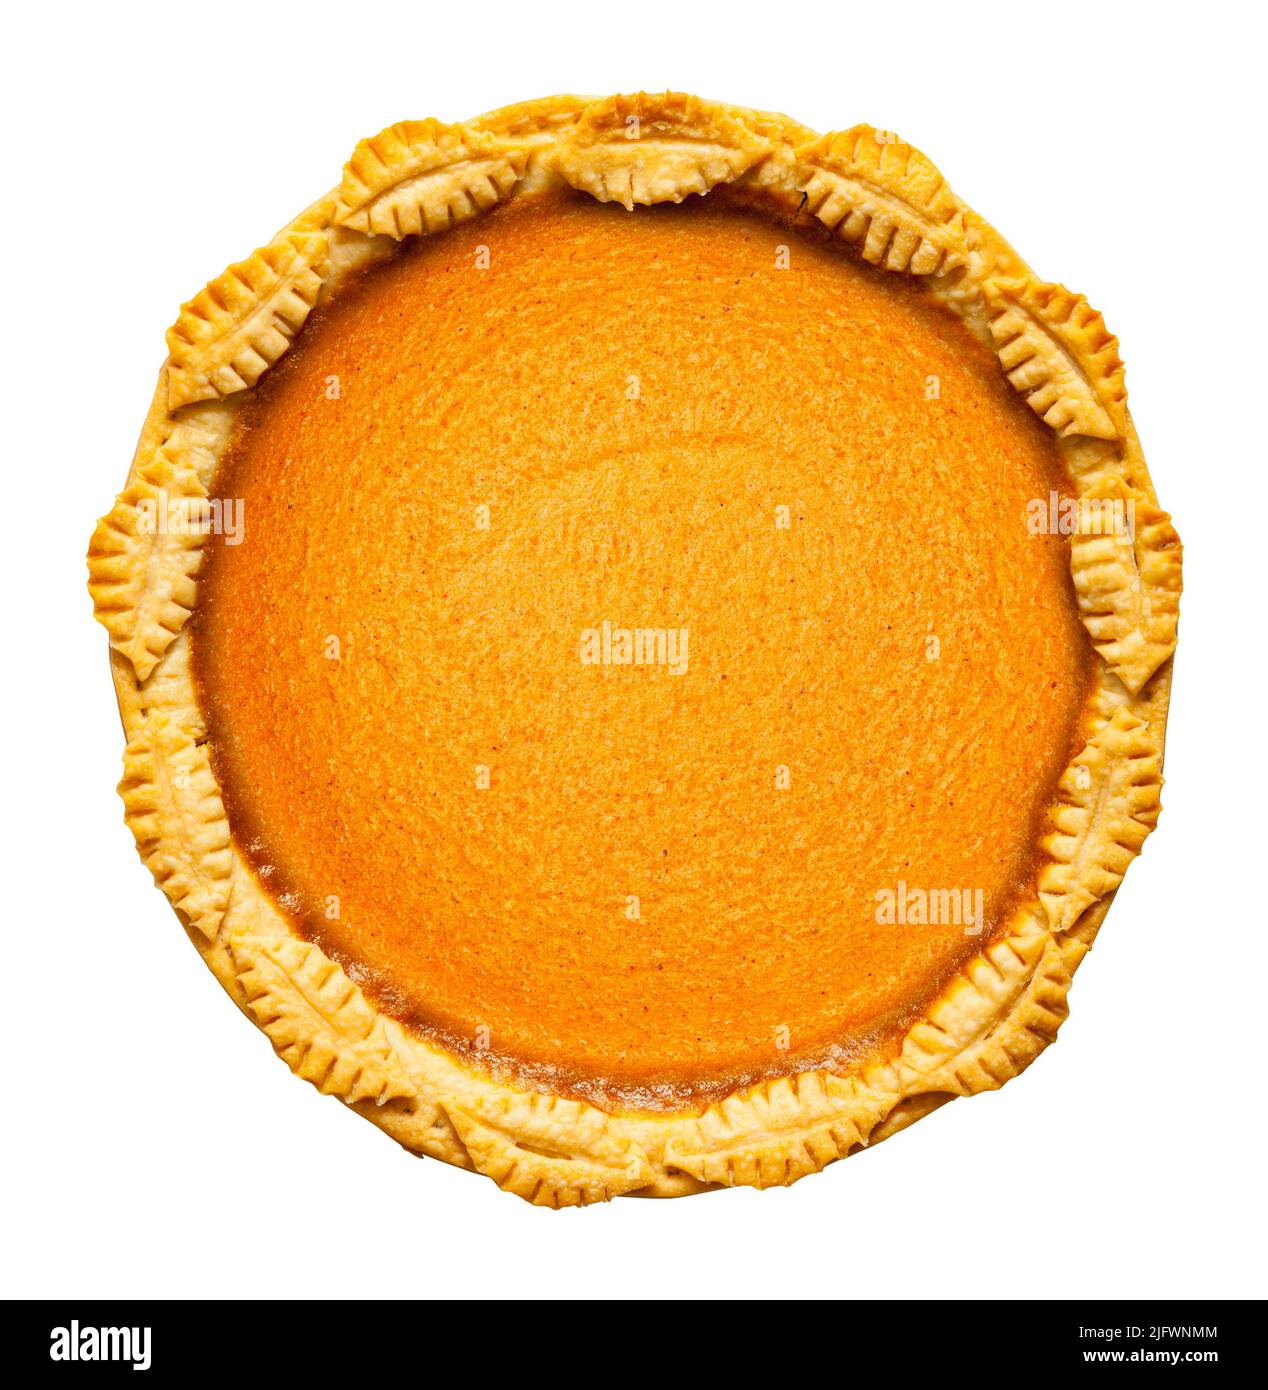 Whole Pumpkin Pie Cut Out On White. Stock Photo